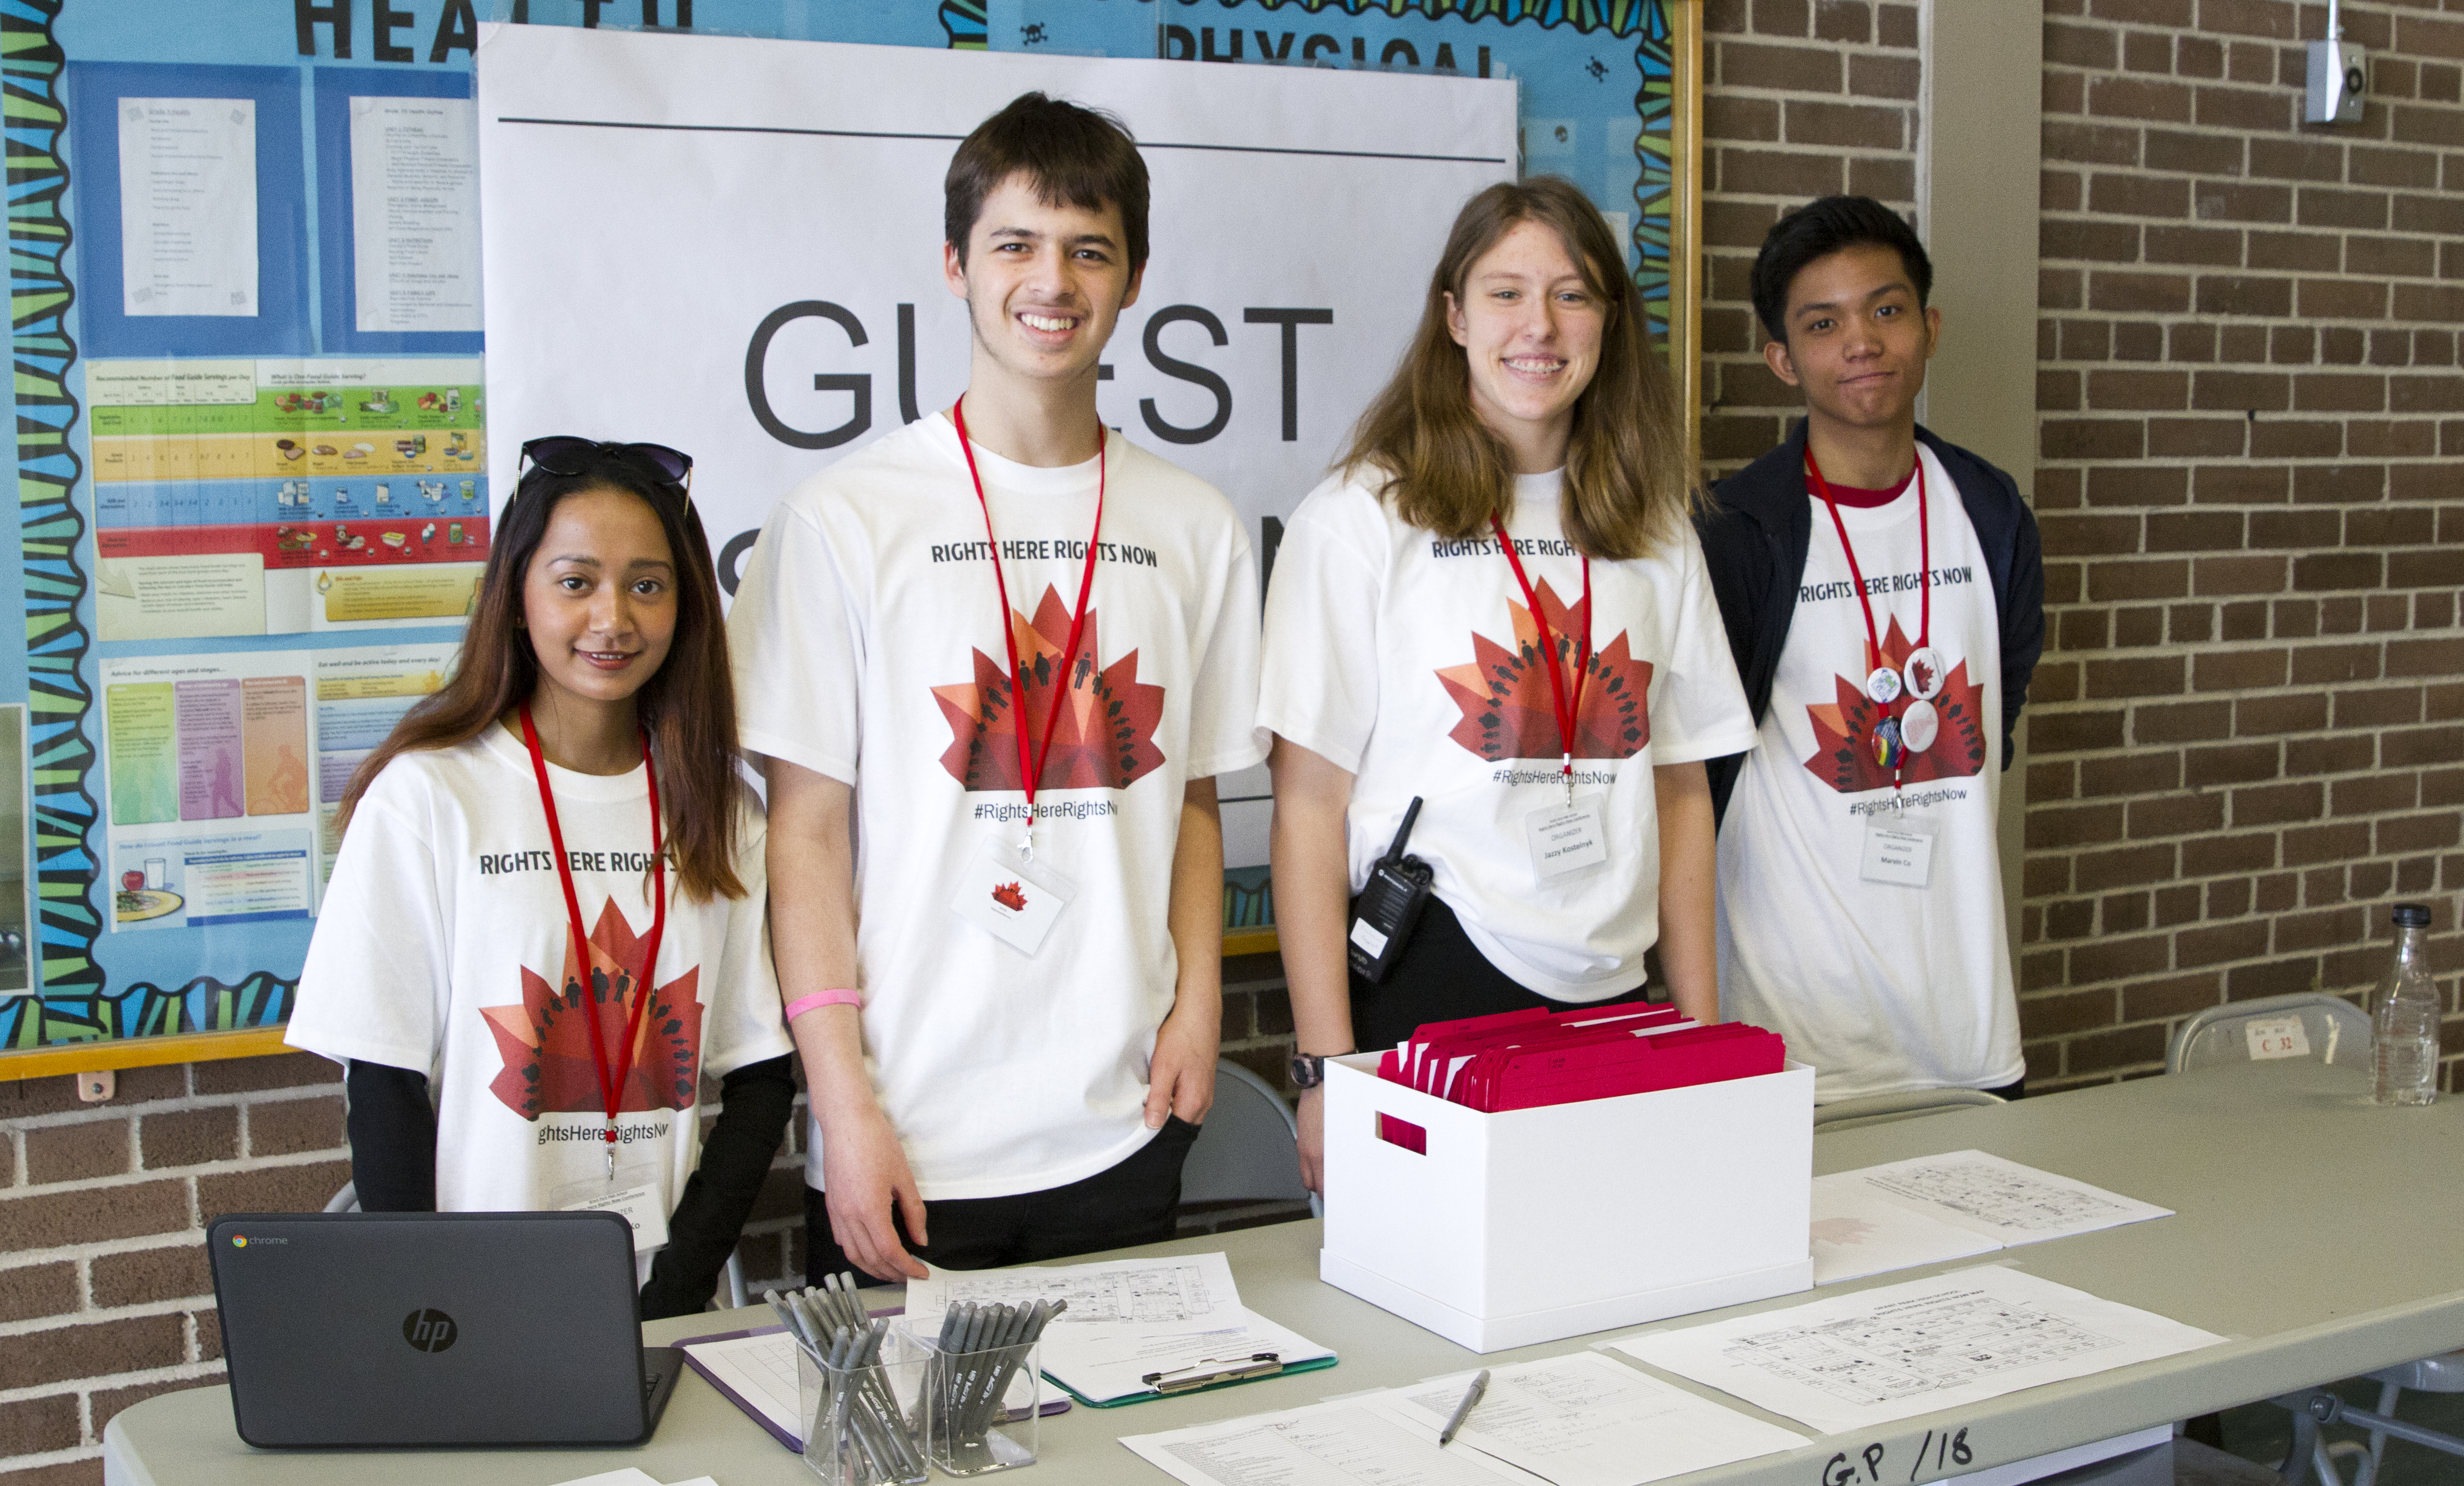 Photo: Student volunteers await guests at Grant Park high school.